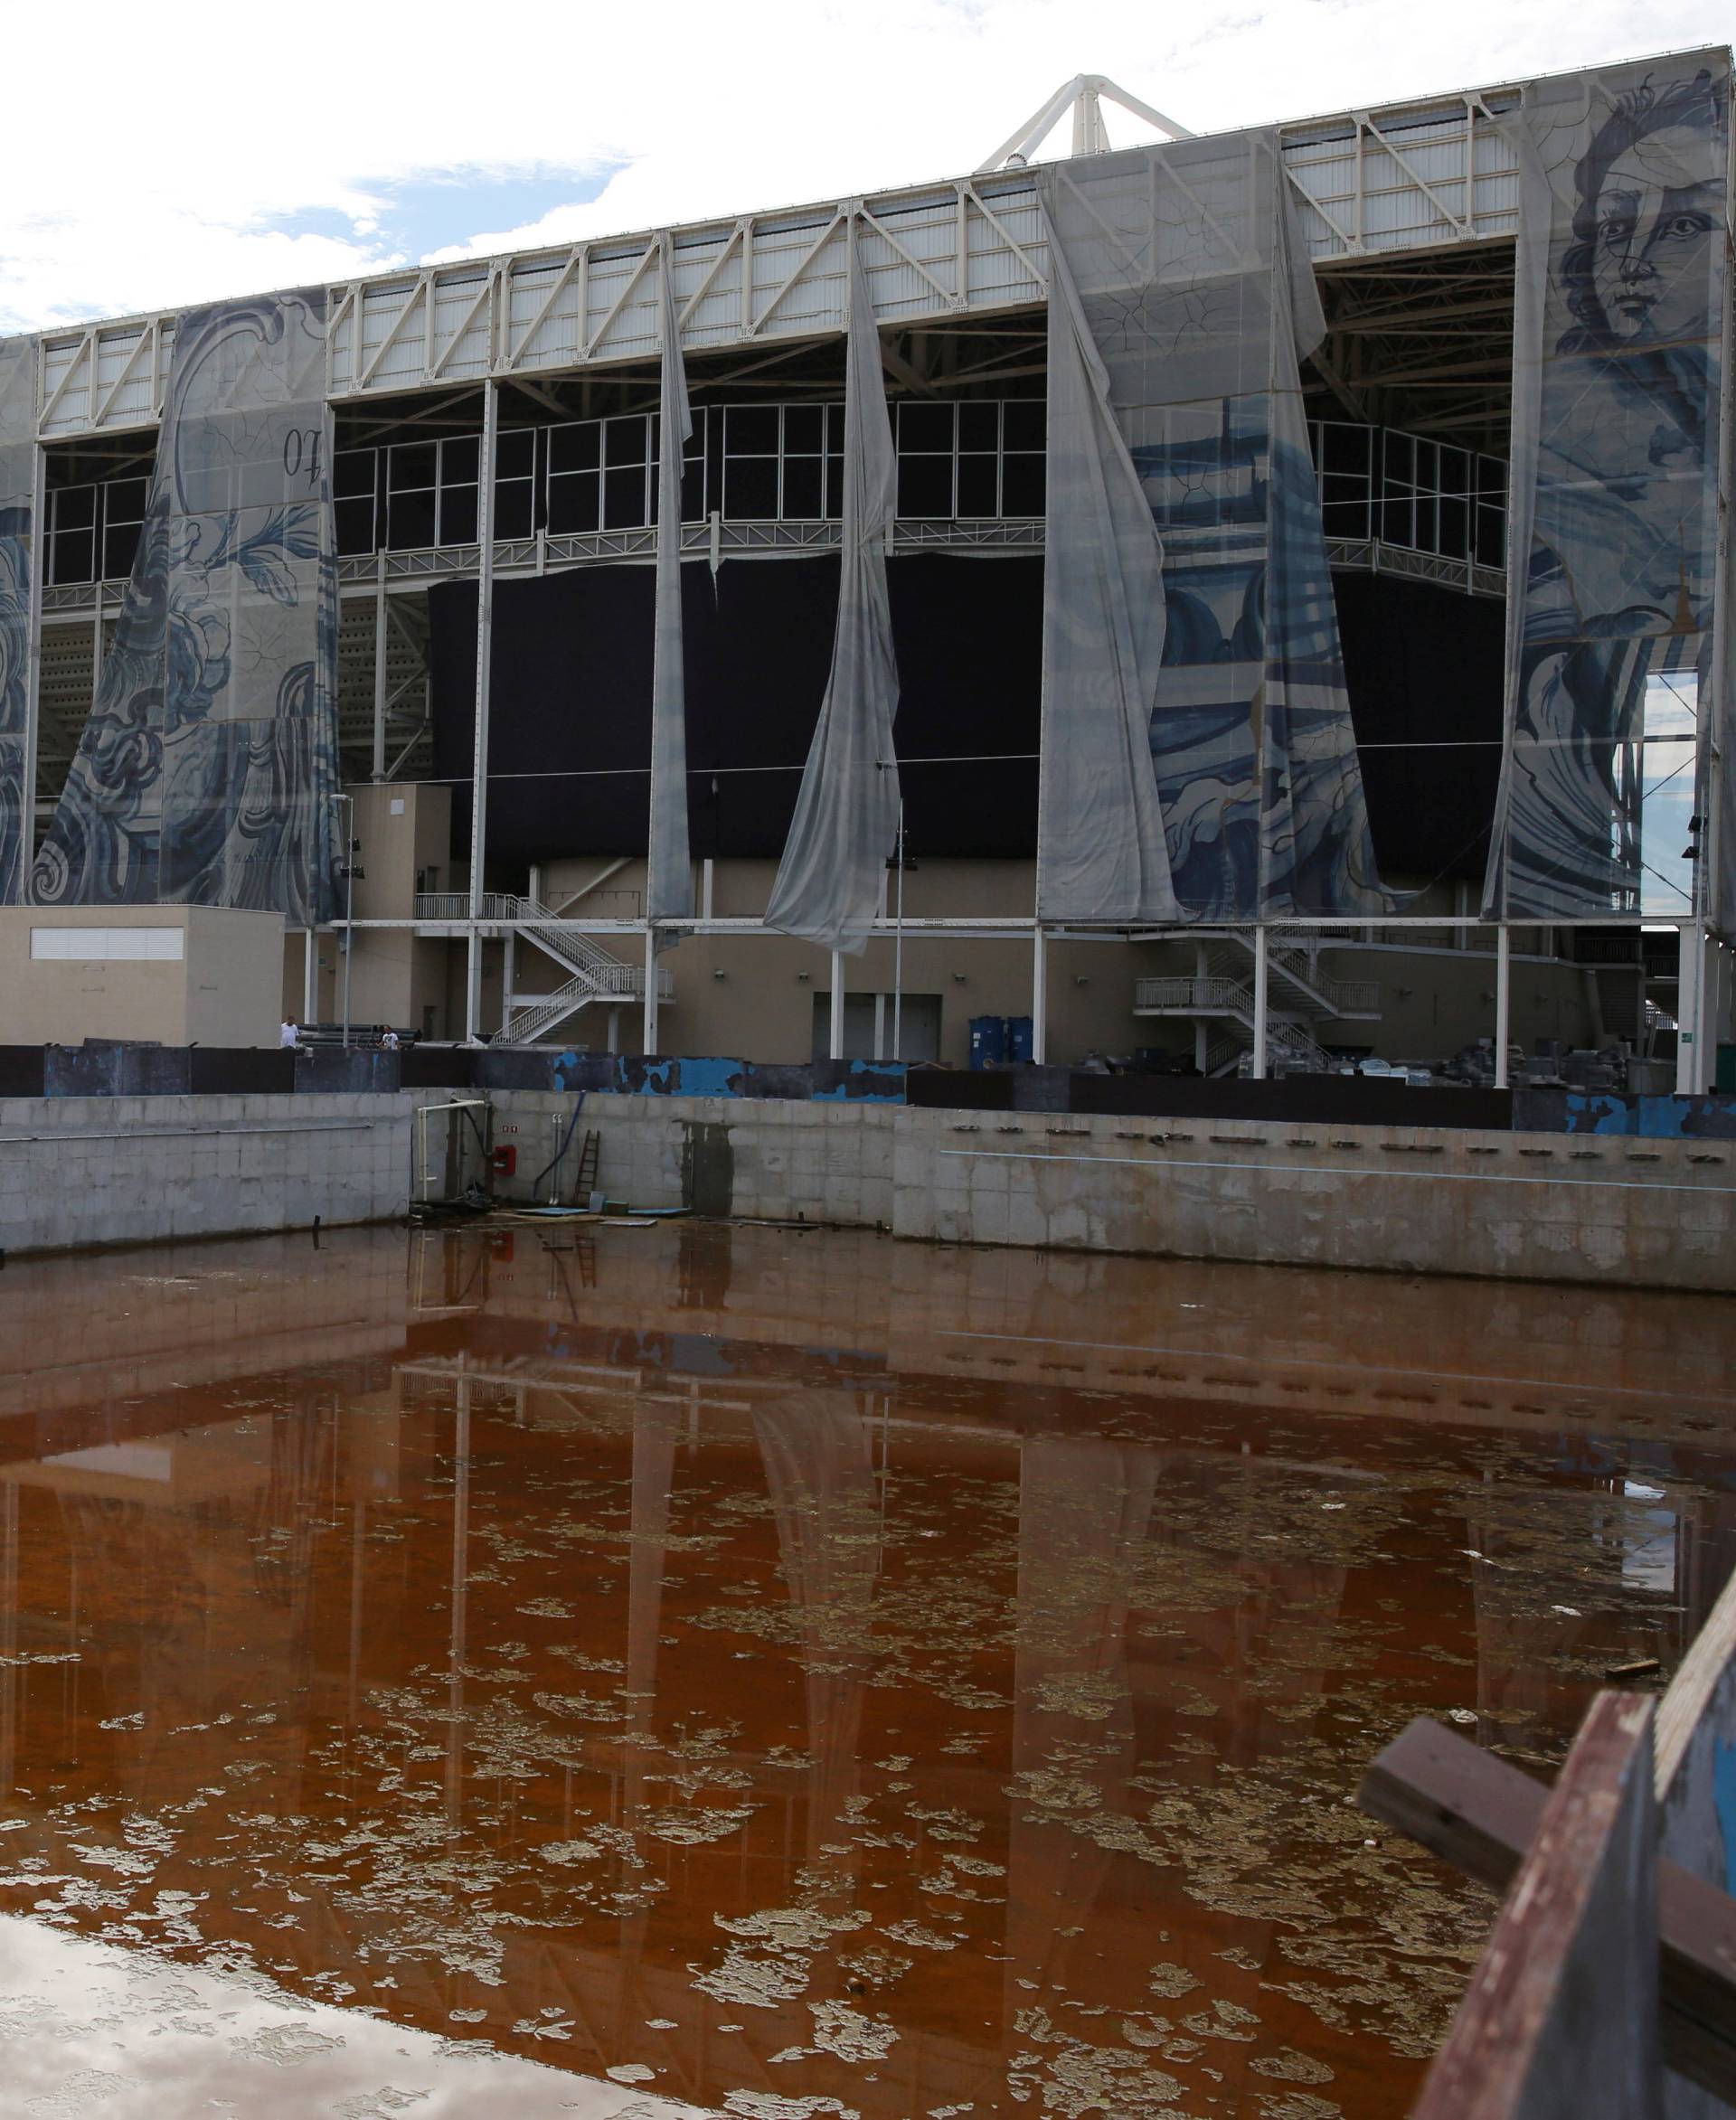 A view of the Olympic Aquatics Stadium, which was used for the Rio 2016 Olympic Games, is seen in Rio de Janeiro